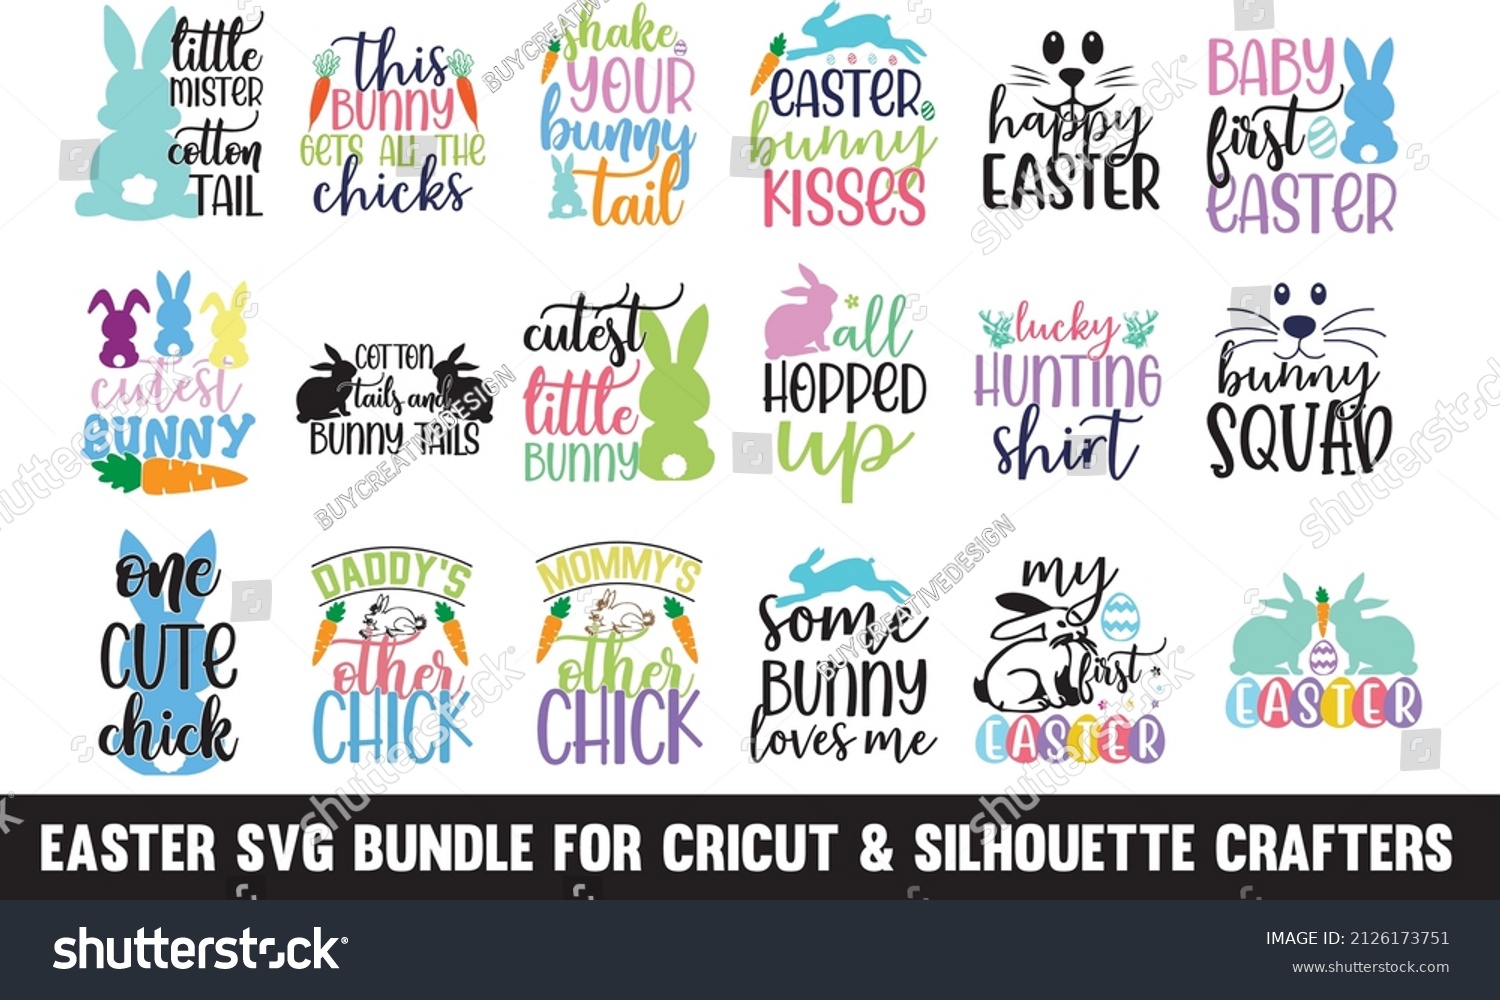 SVG of 
Easter SVG Bundle for Cricut and Silhouette Crafters svg